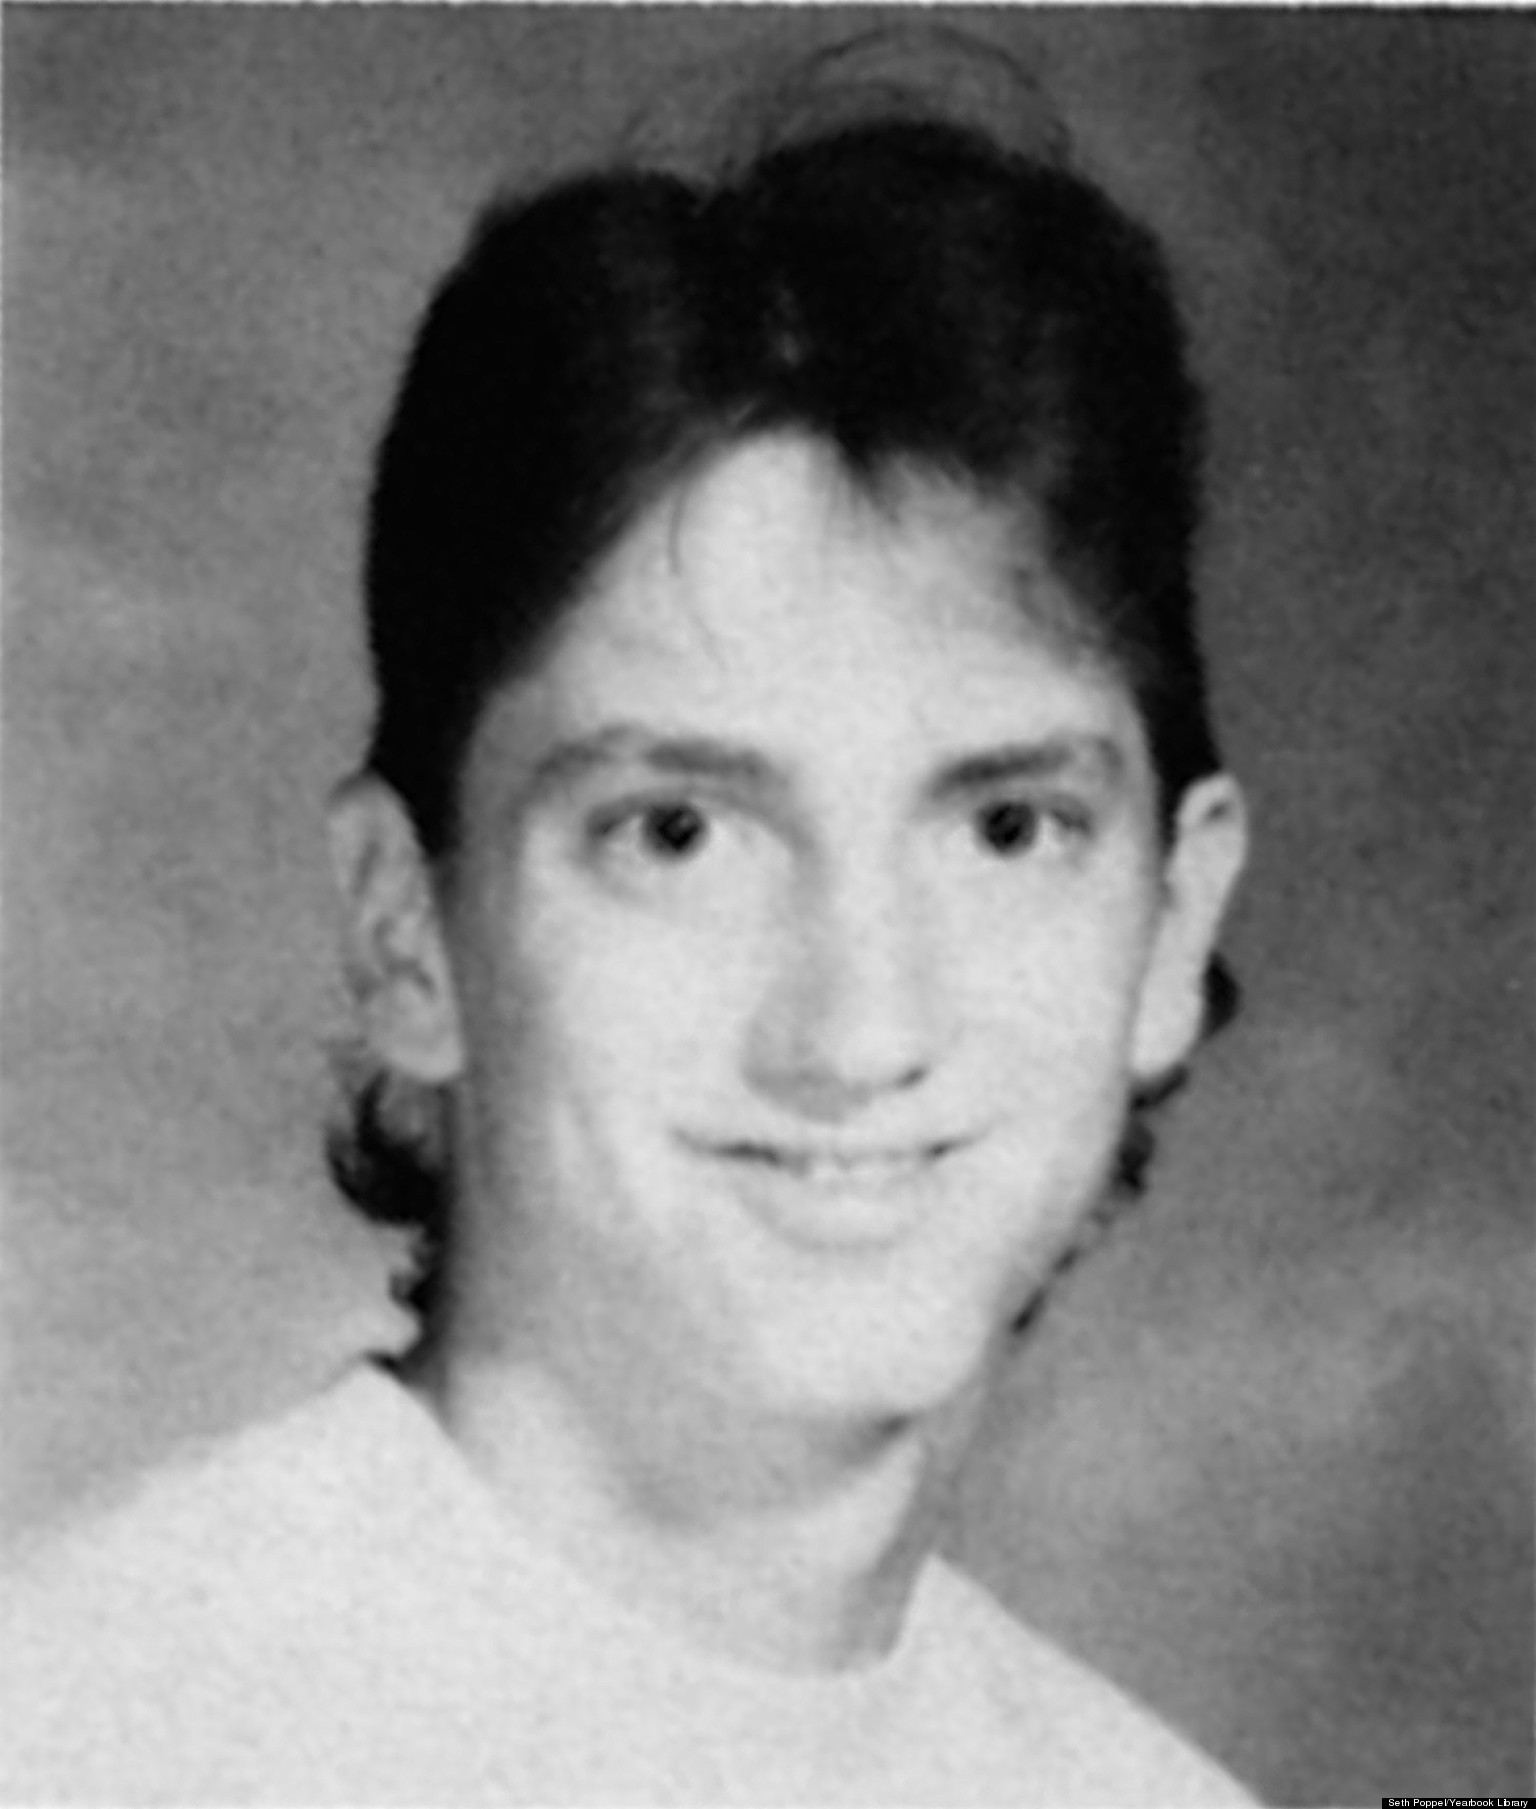 Eminem Turns 40: A Look Back At The Rapper's High School Yearbook Photo | HuffPost